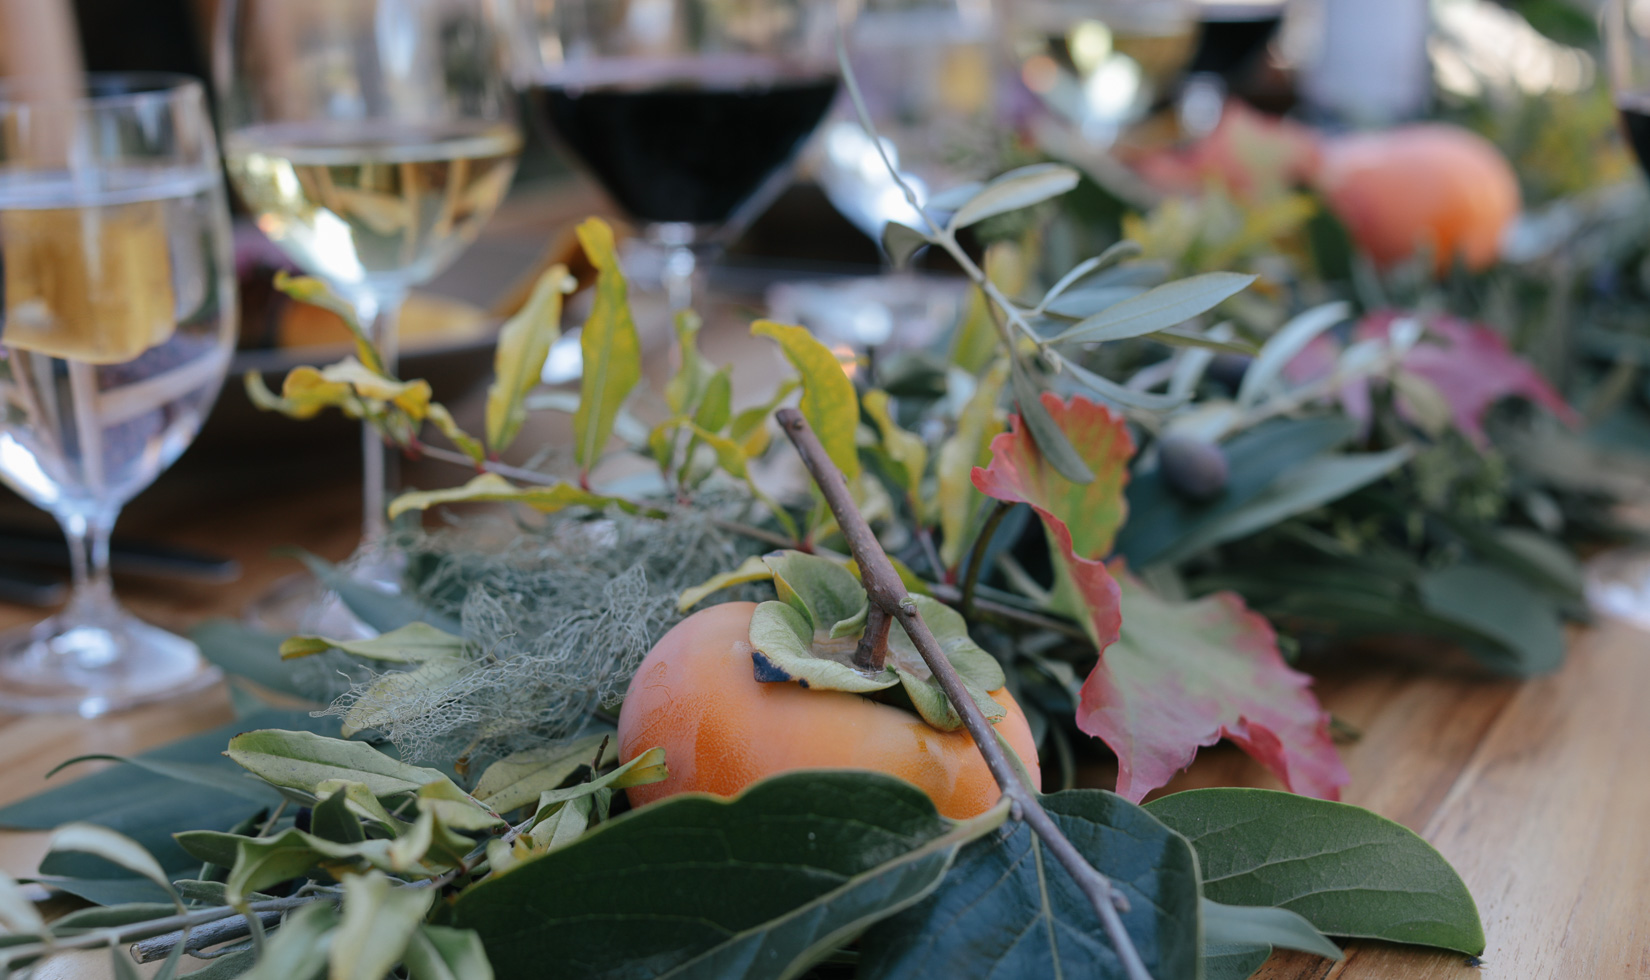 Thanksgiving Table Decoration Ideas, Garland Table Runner with Persimmons